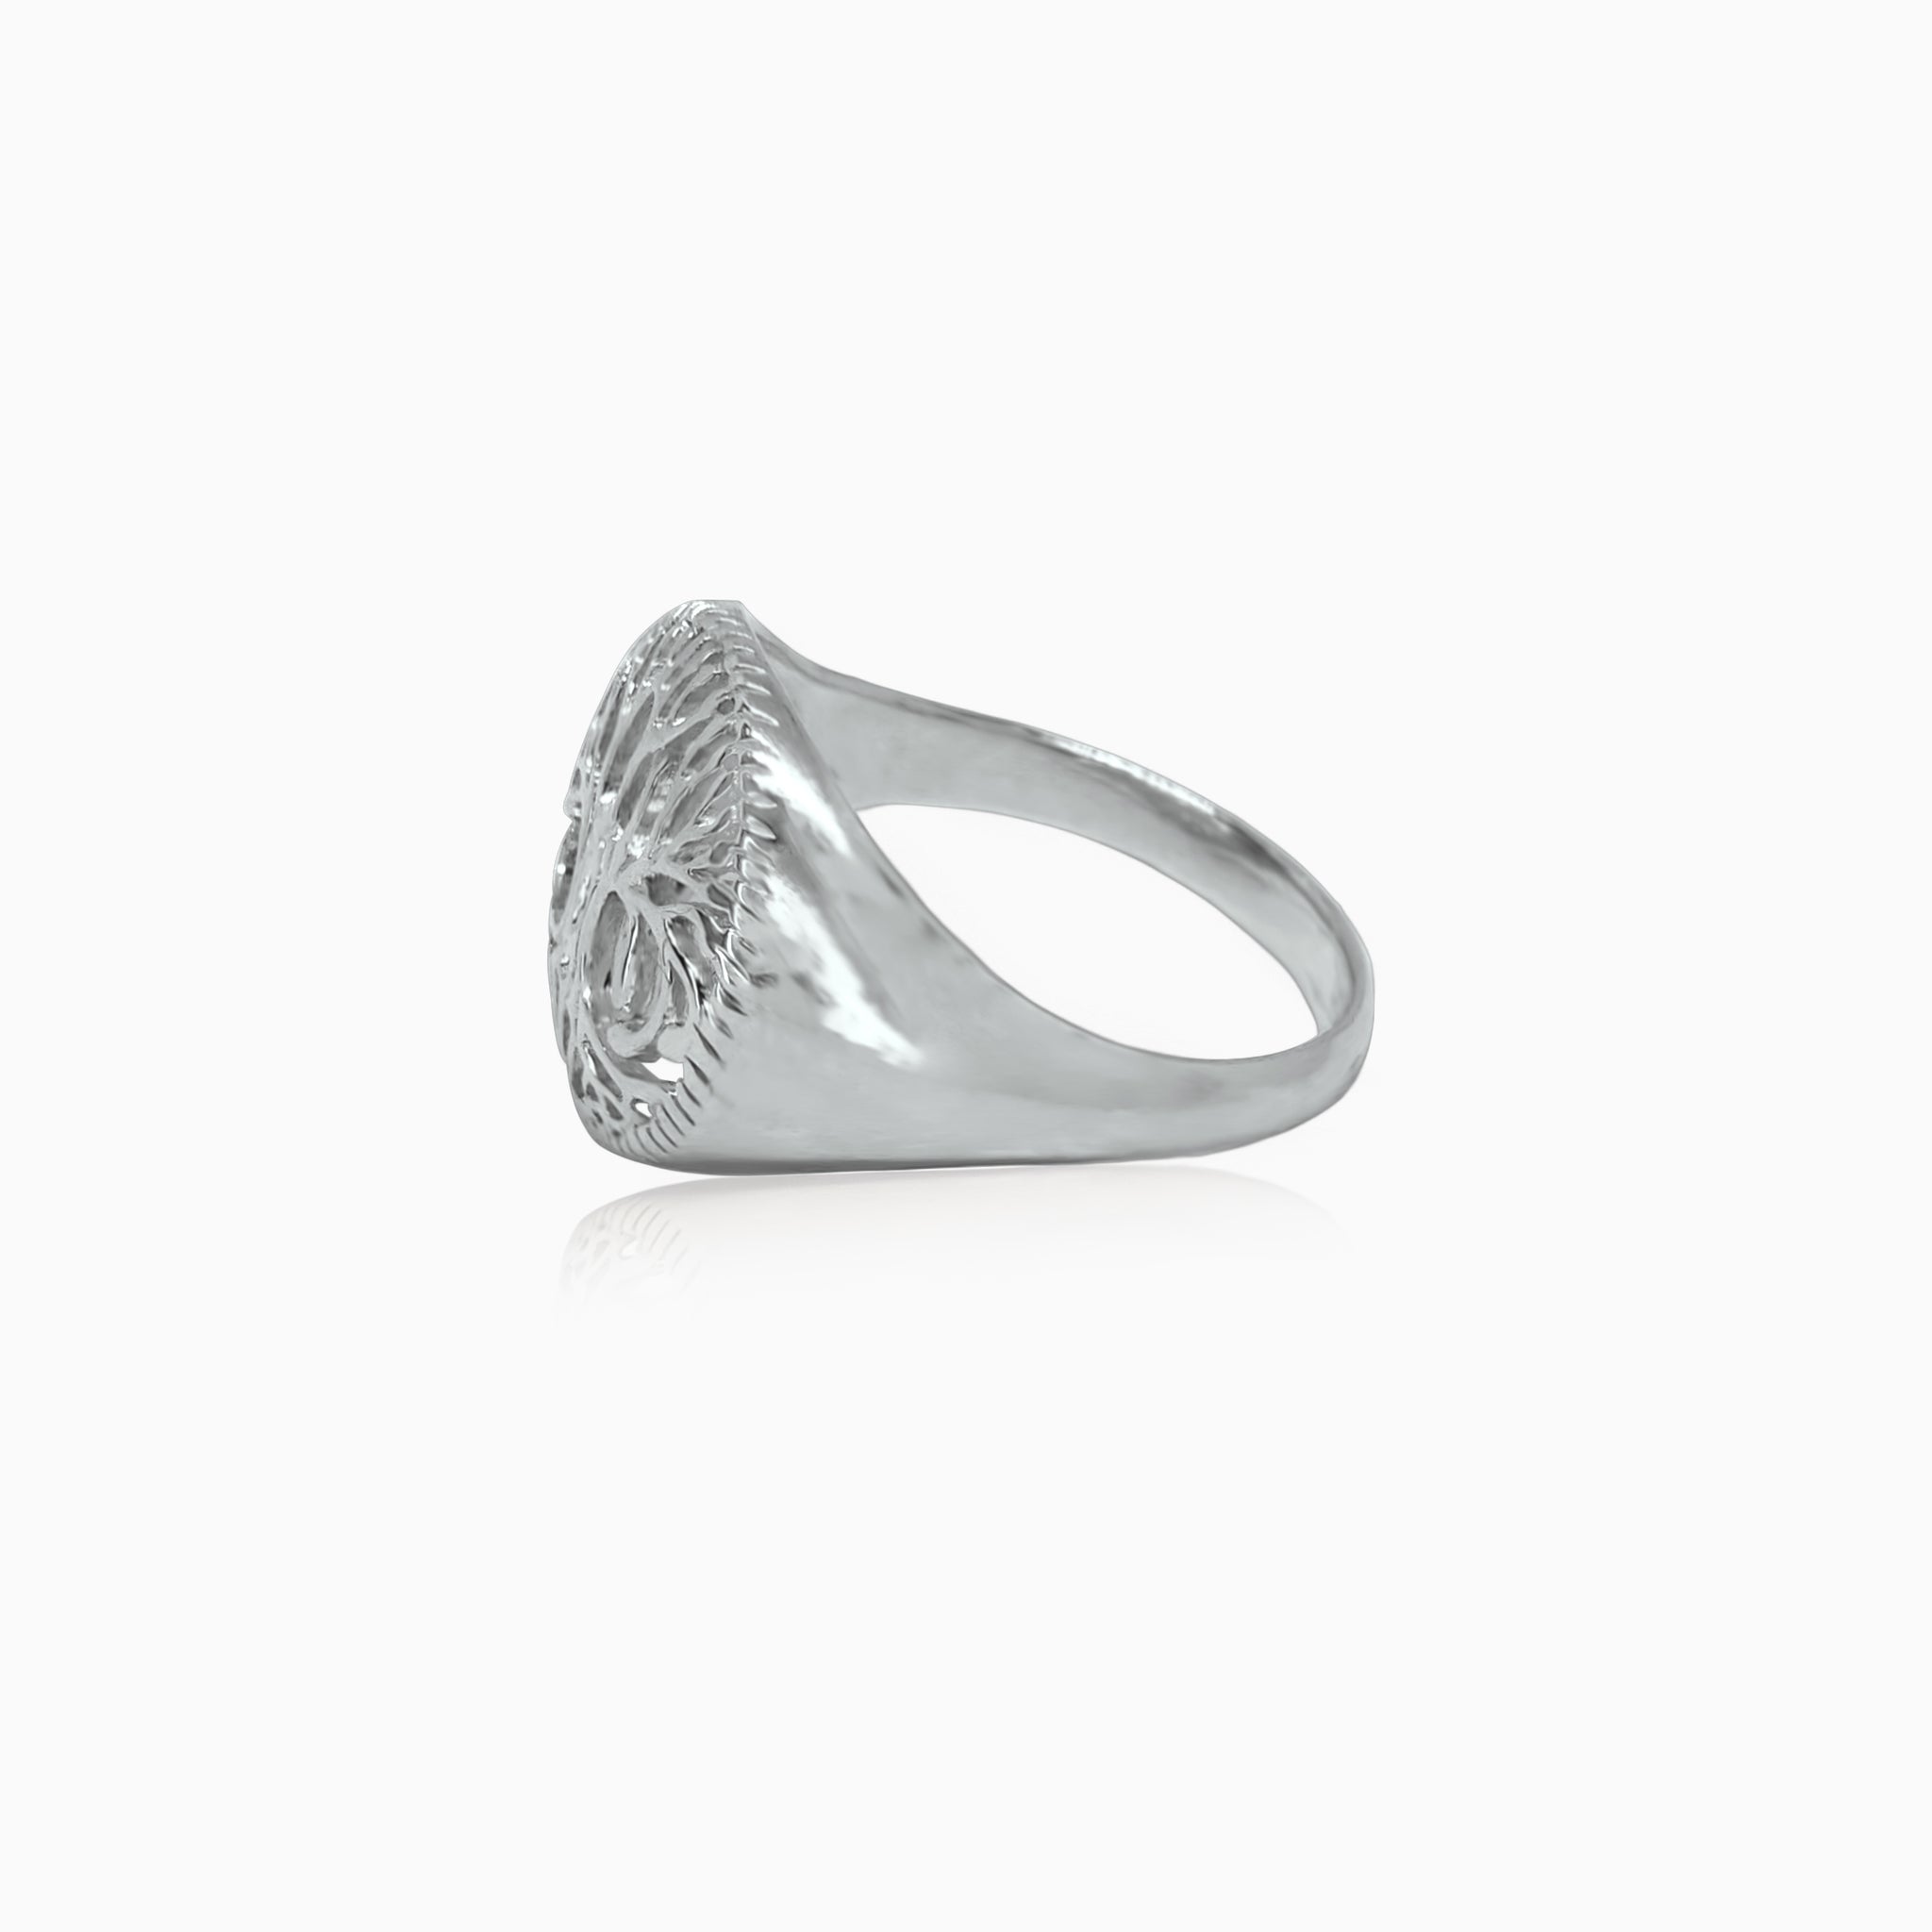 Silver Tree Of Life Unisex Ring